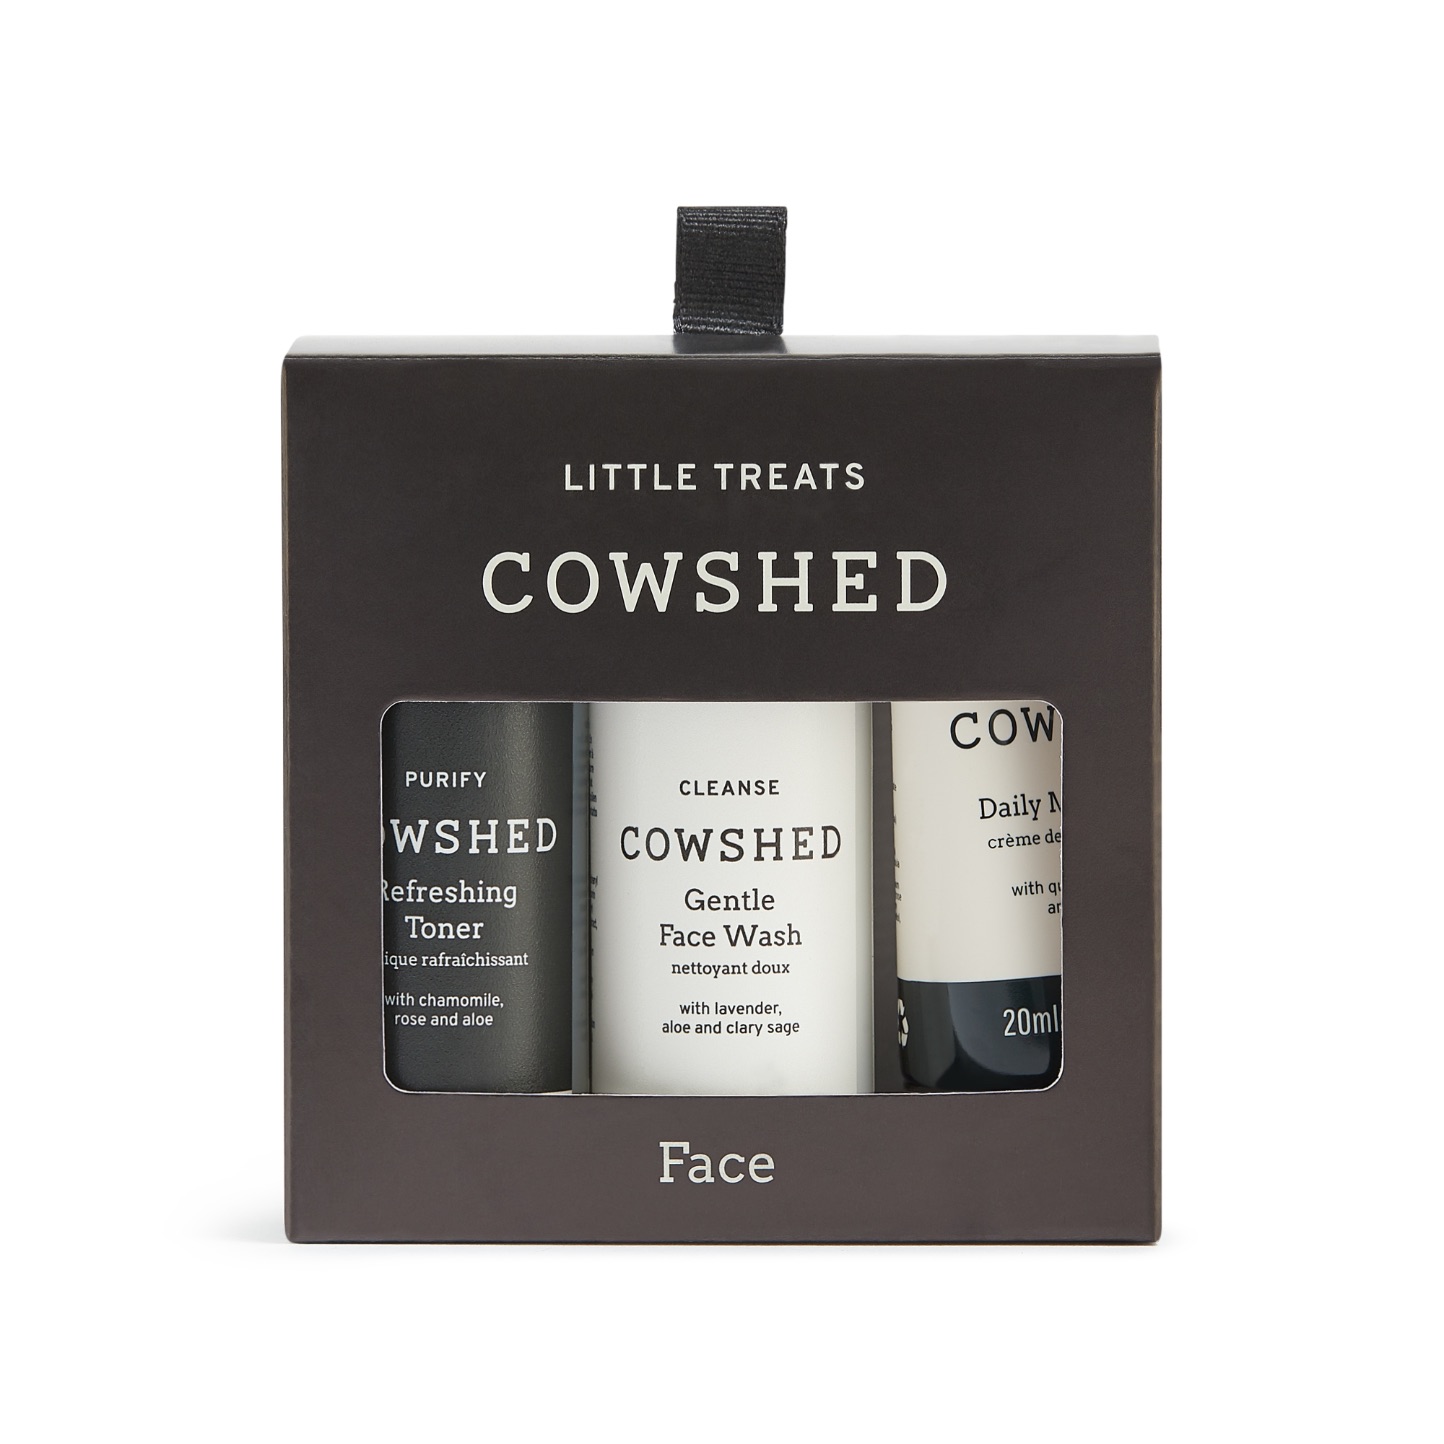 Cowshed Little Treats - Face Gift Set